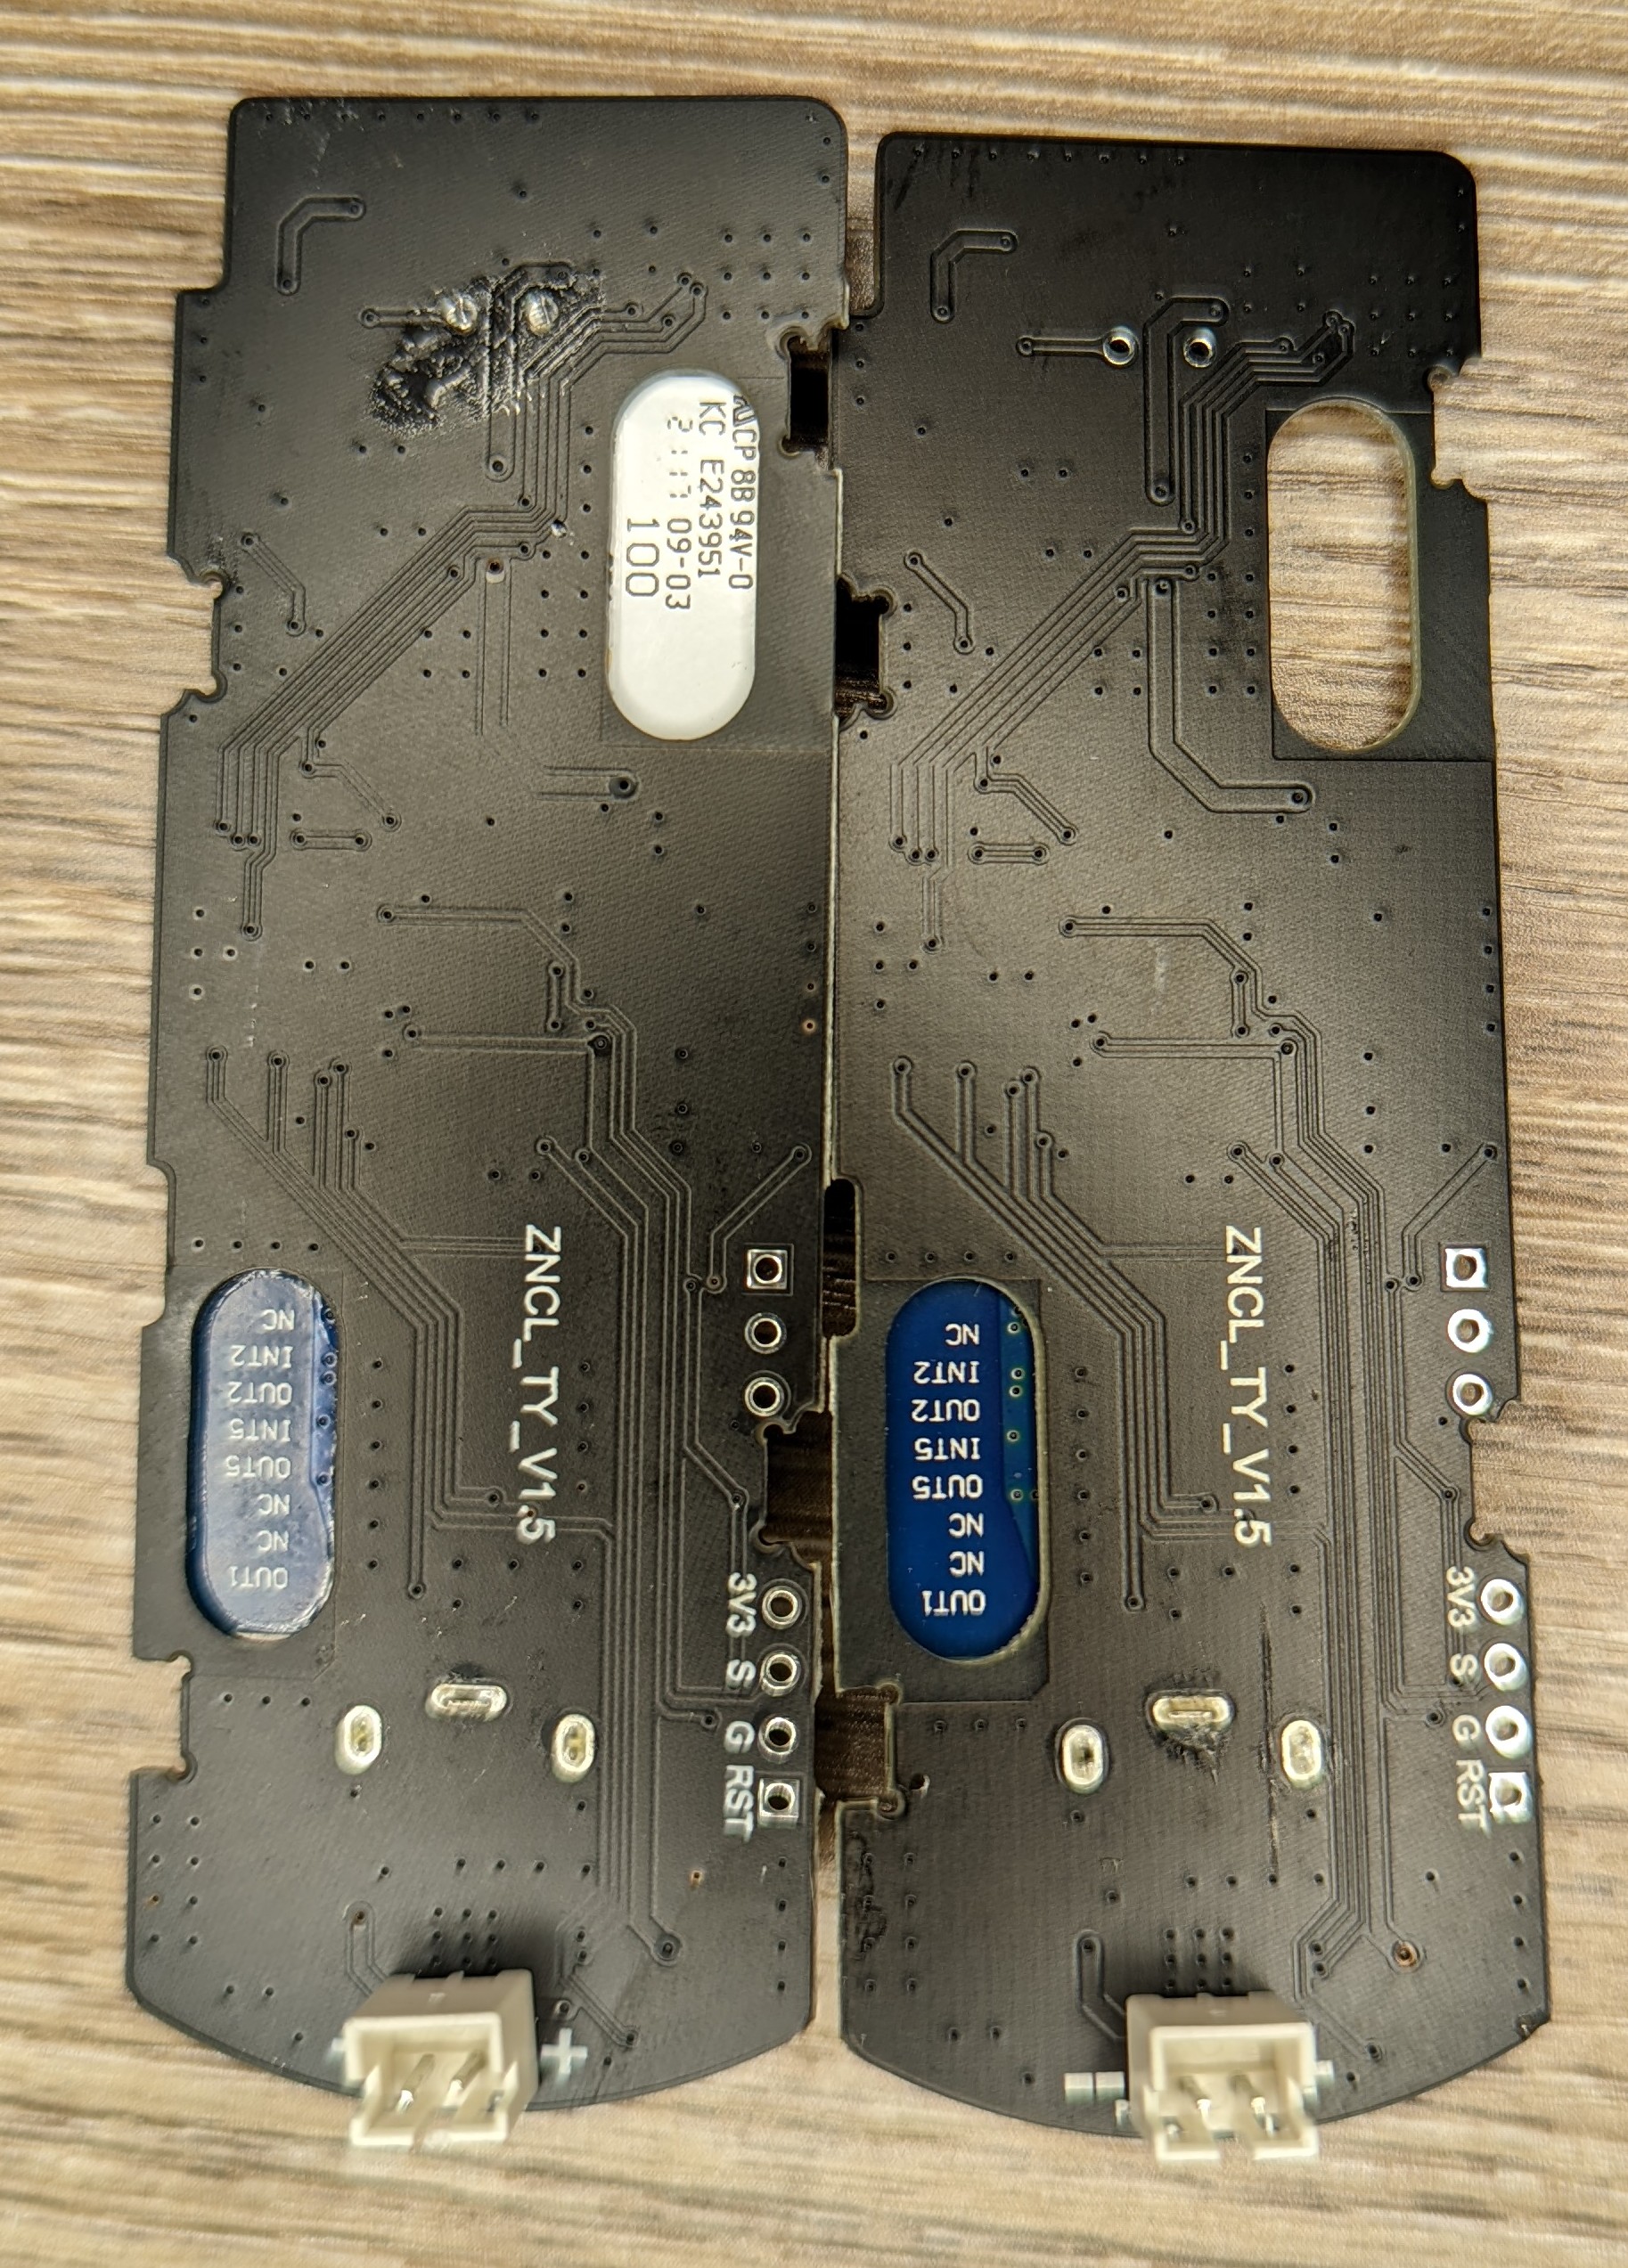 Photo showing closeup of the read of the main PCBs from both units side by side.